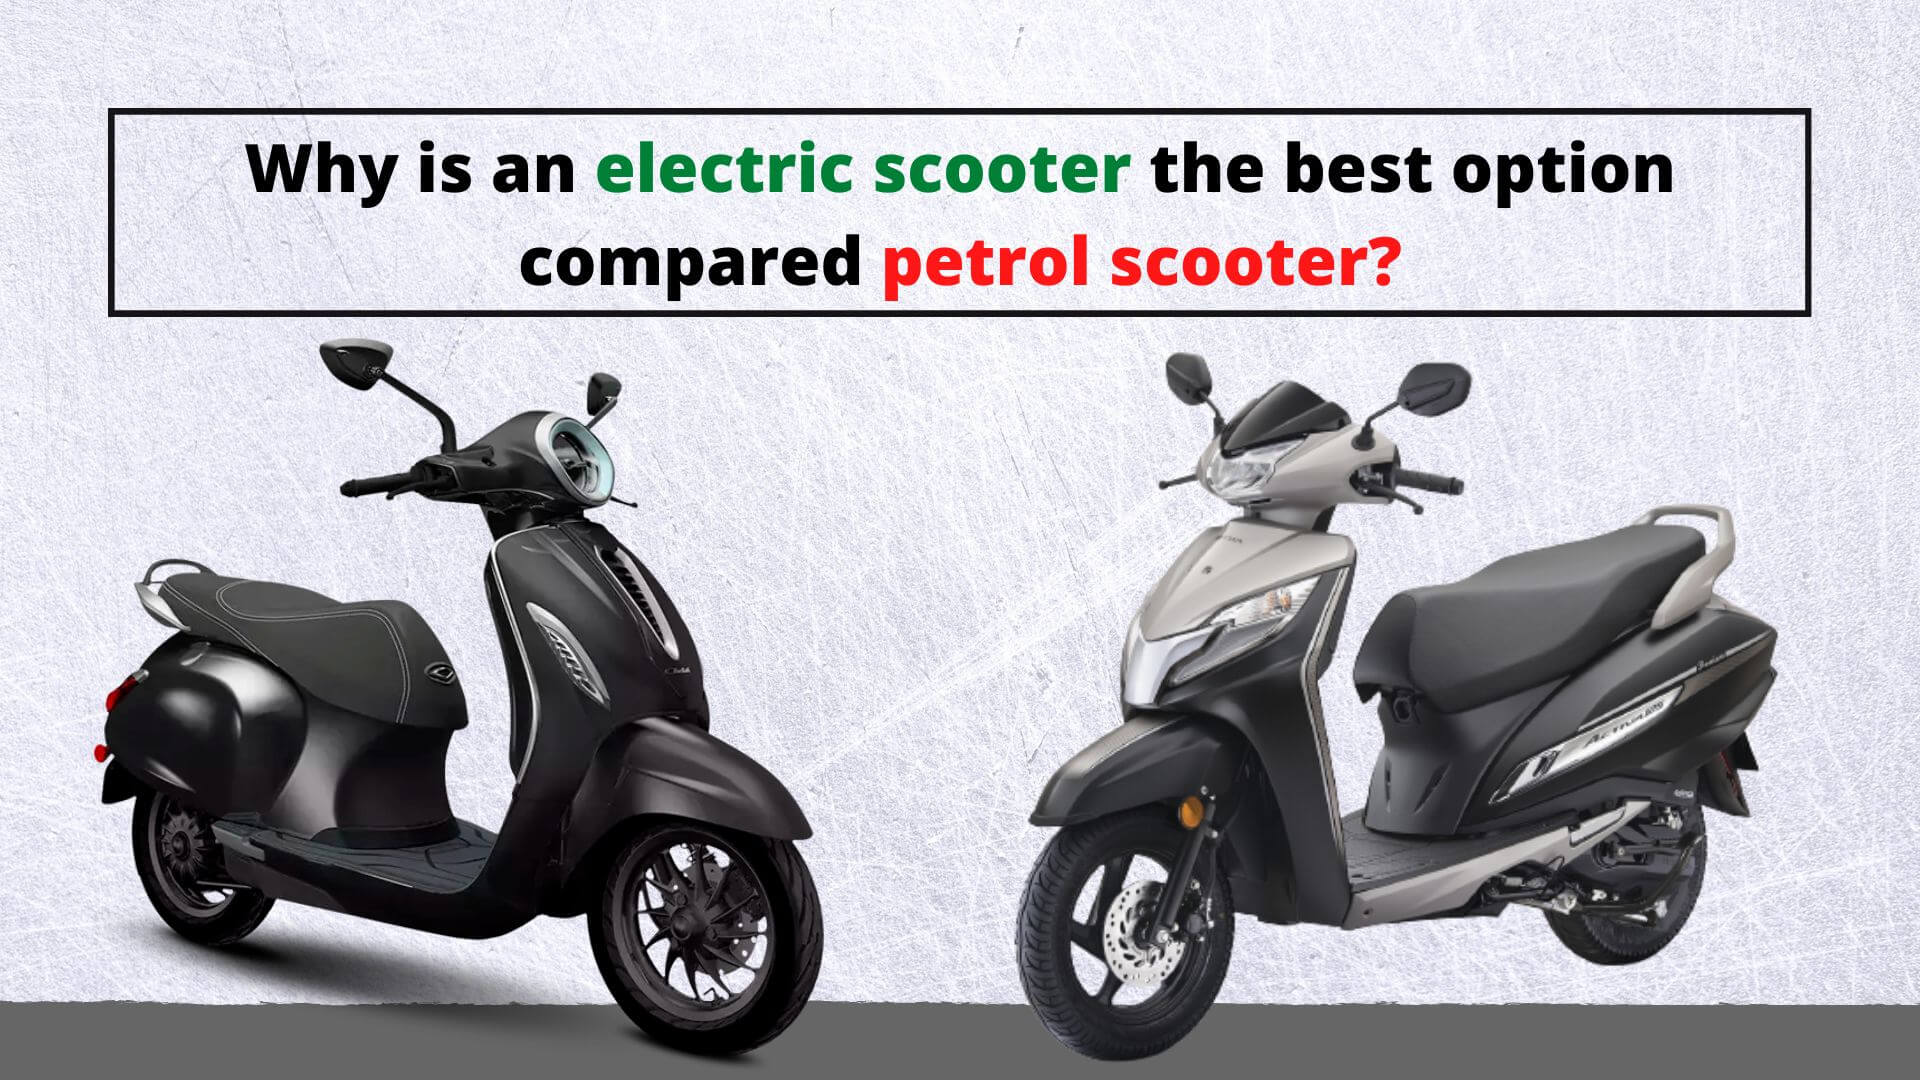 https://e-vehicleinfo.com/why-electric-scooter-best-option-compared-petrol-scooter/